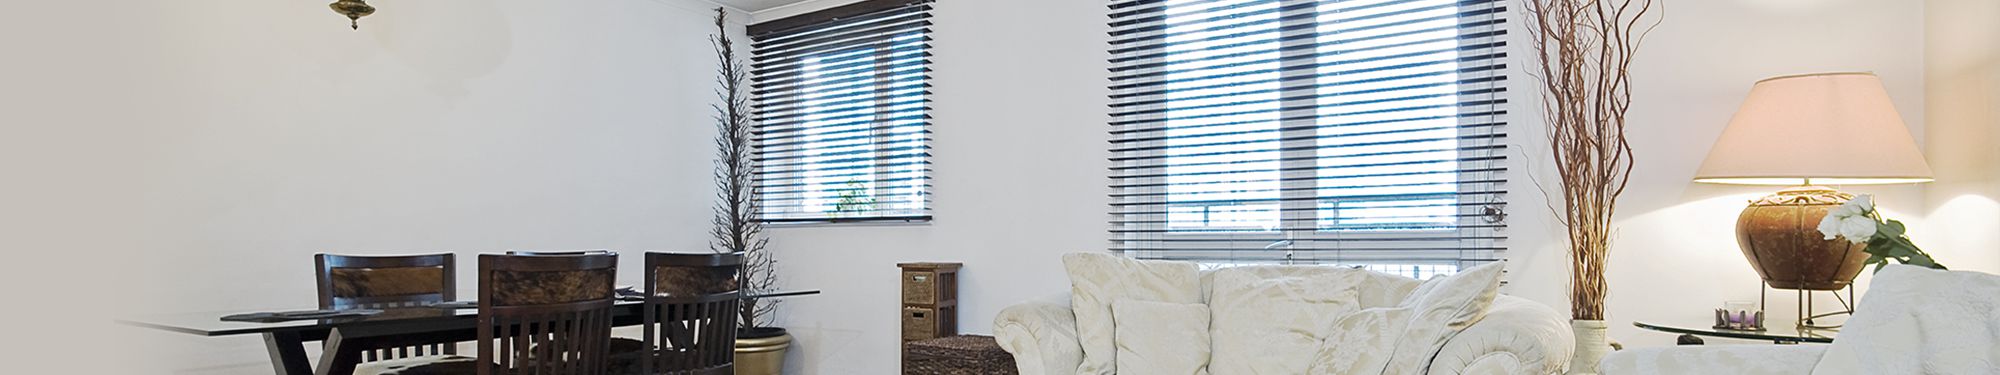 custom blinds in a living & dining area